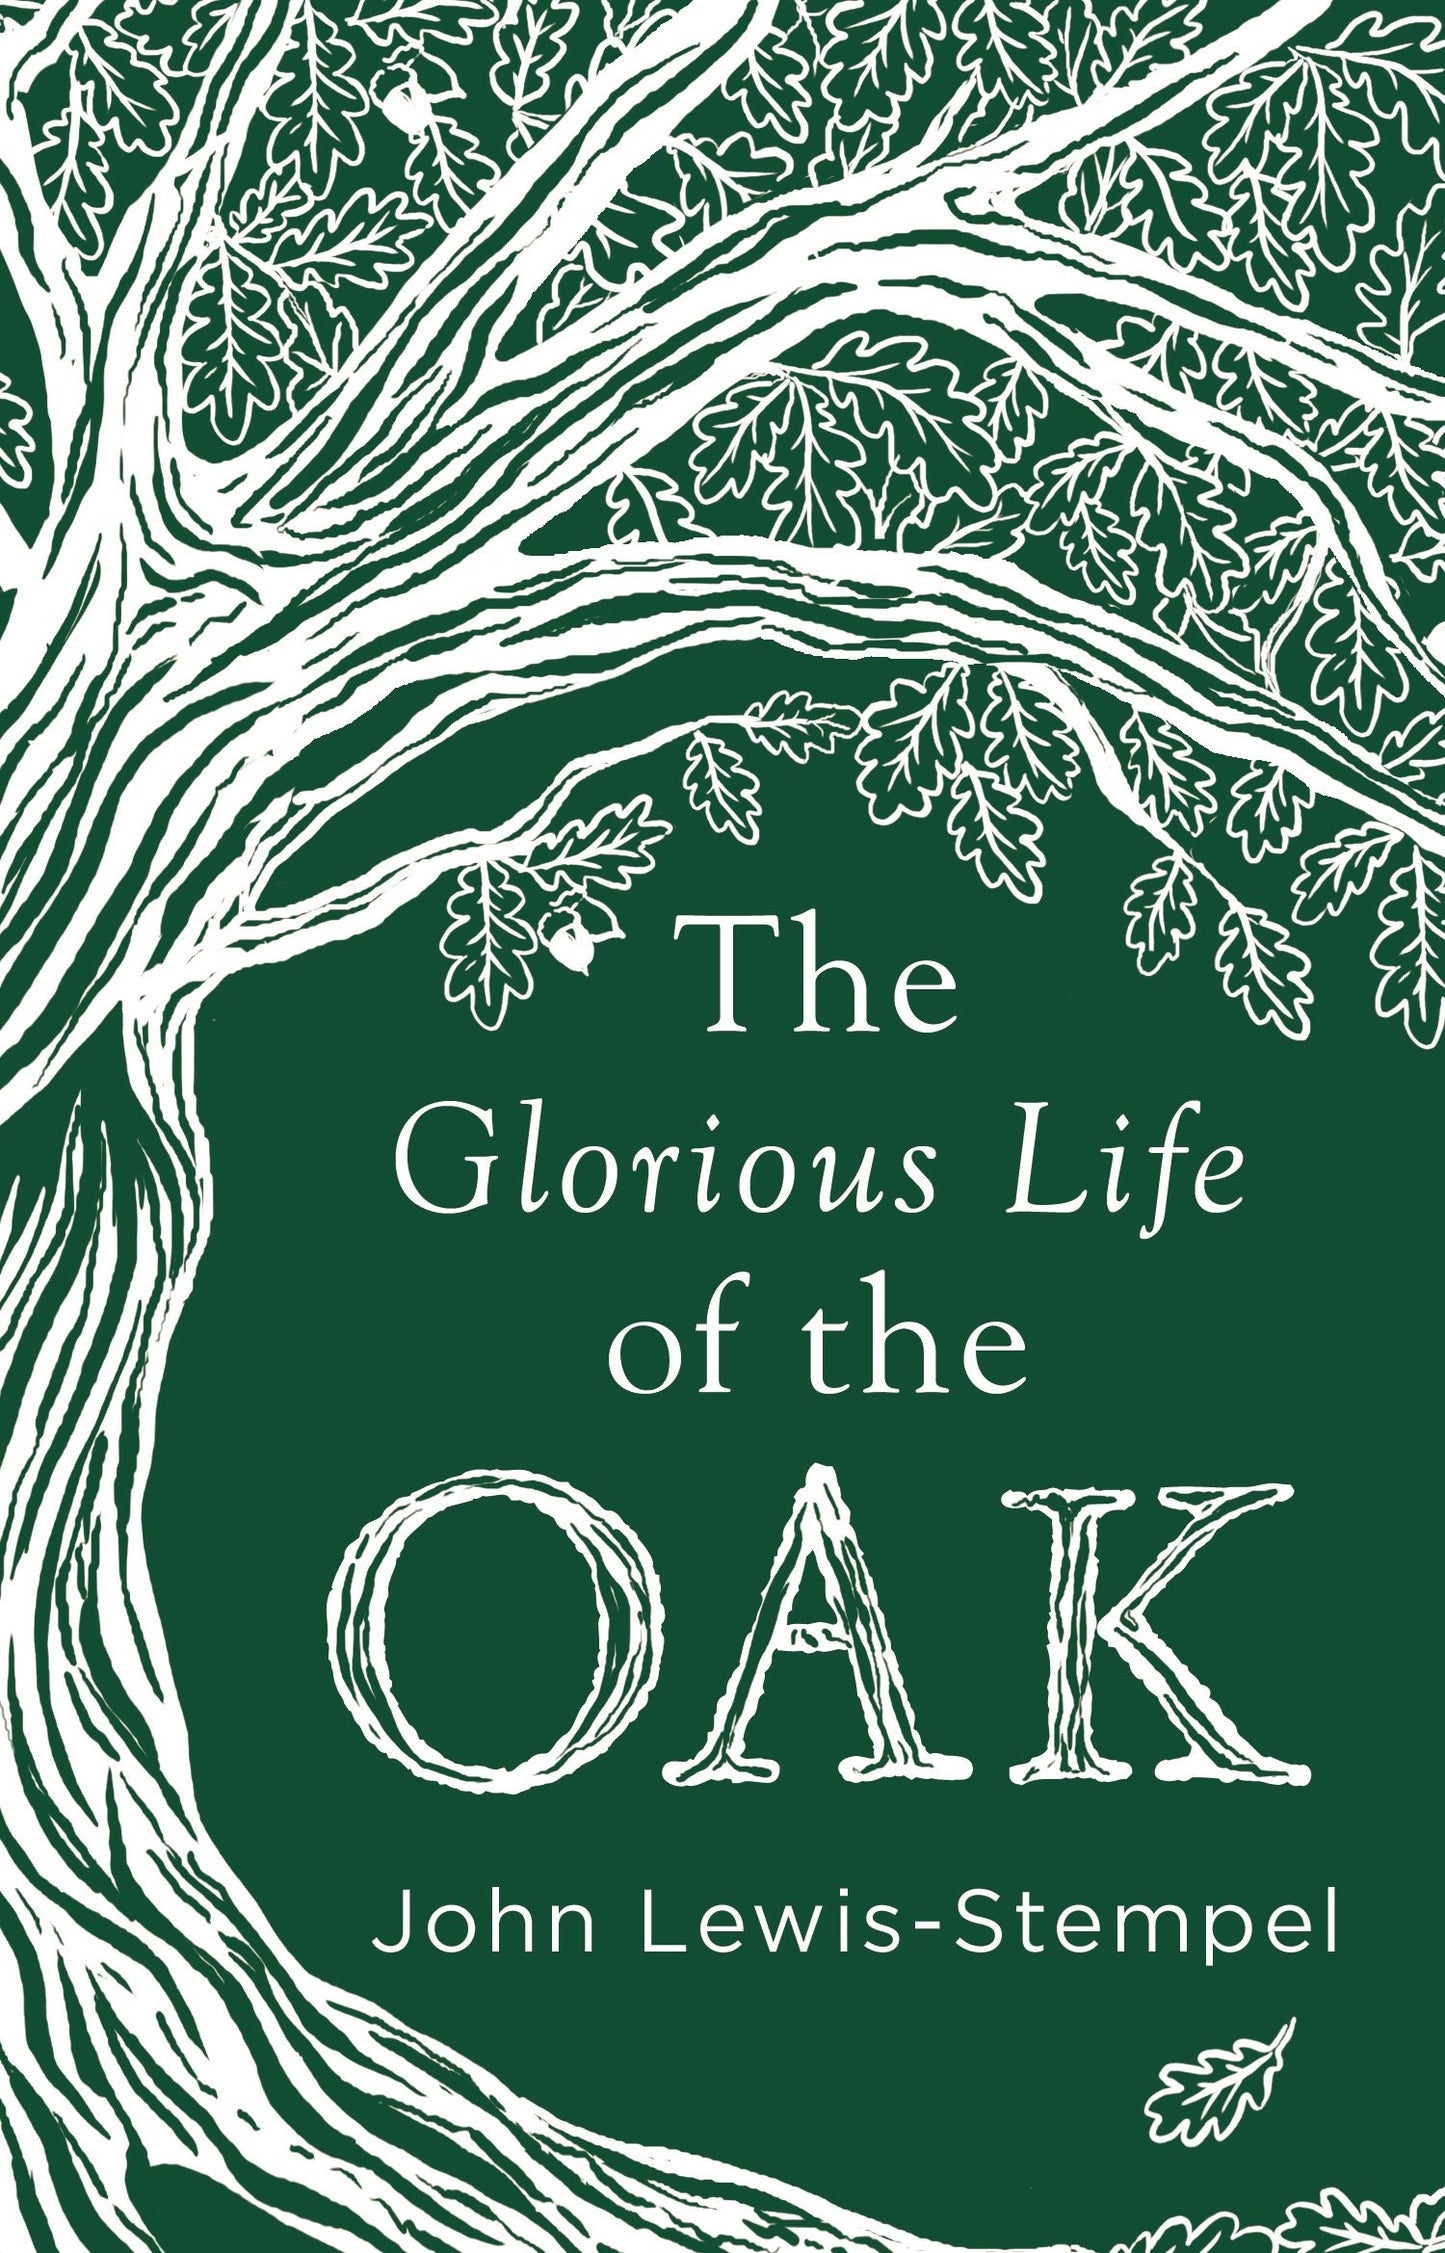 The Glorious Life of the Oak by John Lewis-Stempel